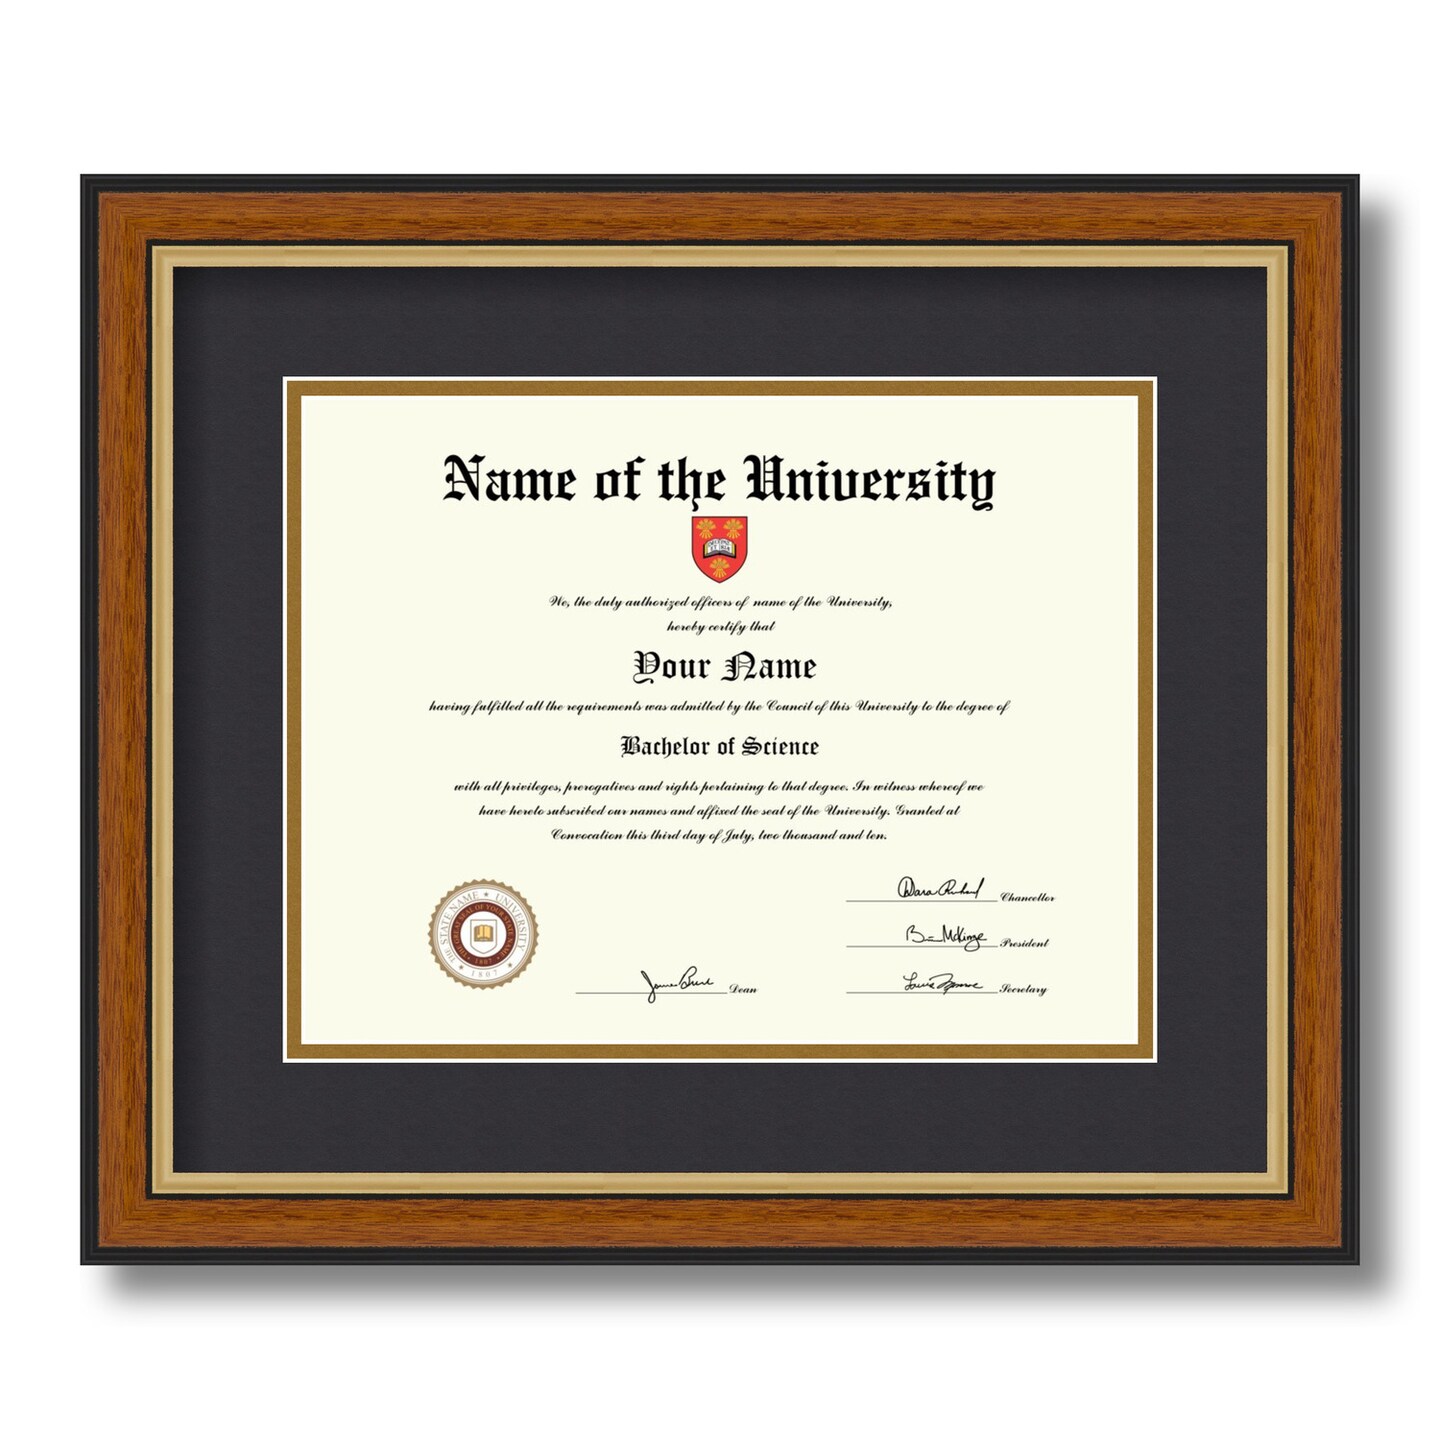 ArtToFrames 8.5x11 inch Diploma Frame - Framed with Black and Gold Mats, Comes with Regular Glass and Sawtooth Hanger for Wall Hanging (D-8.5x11)